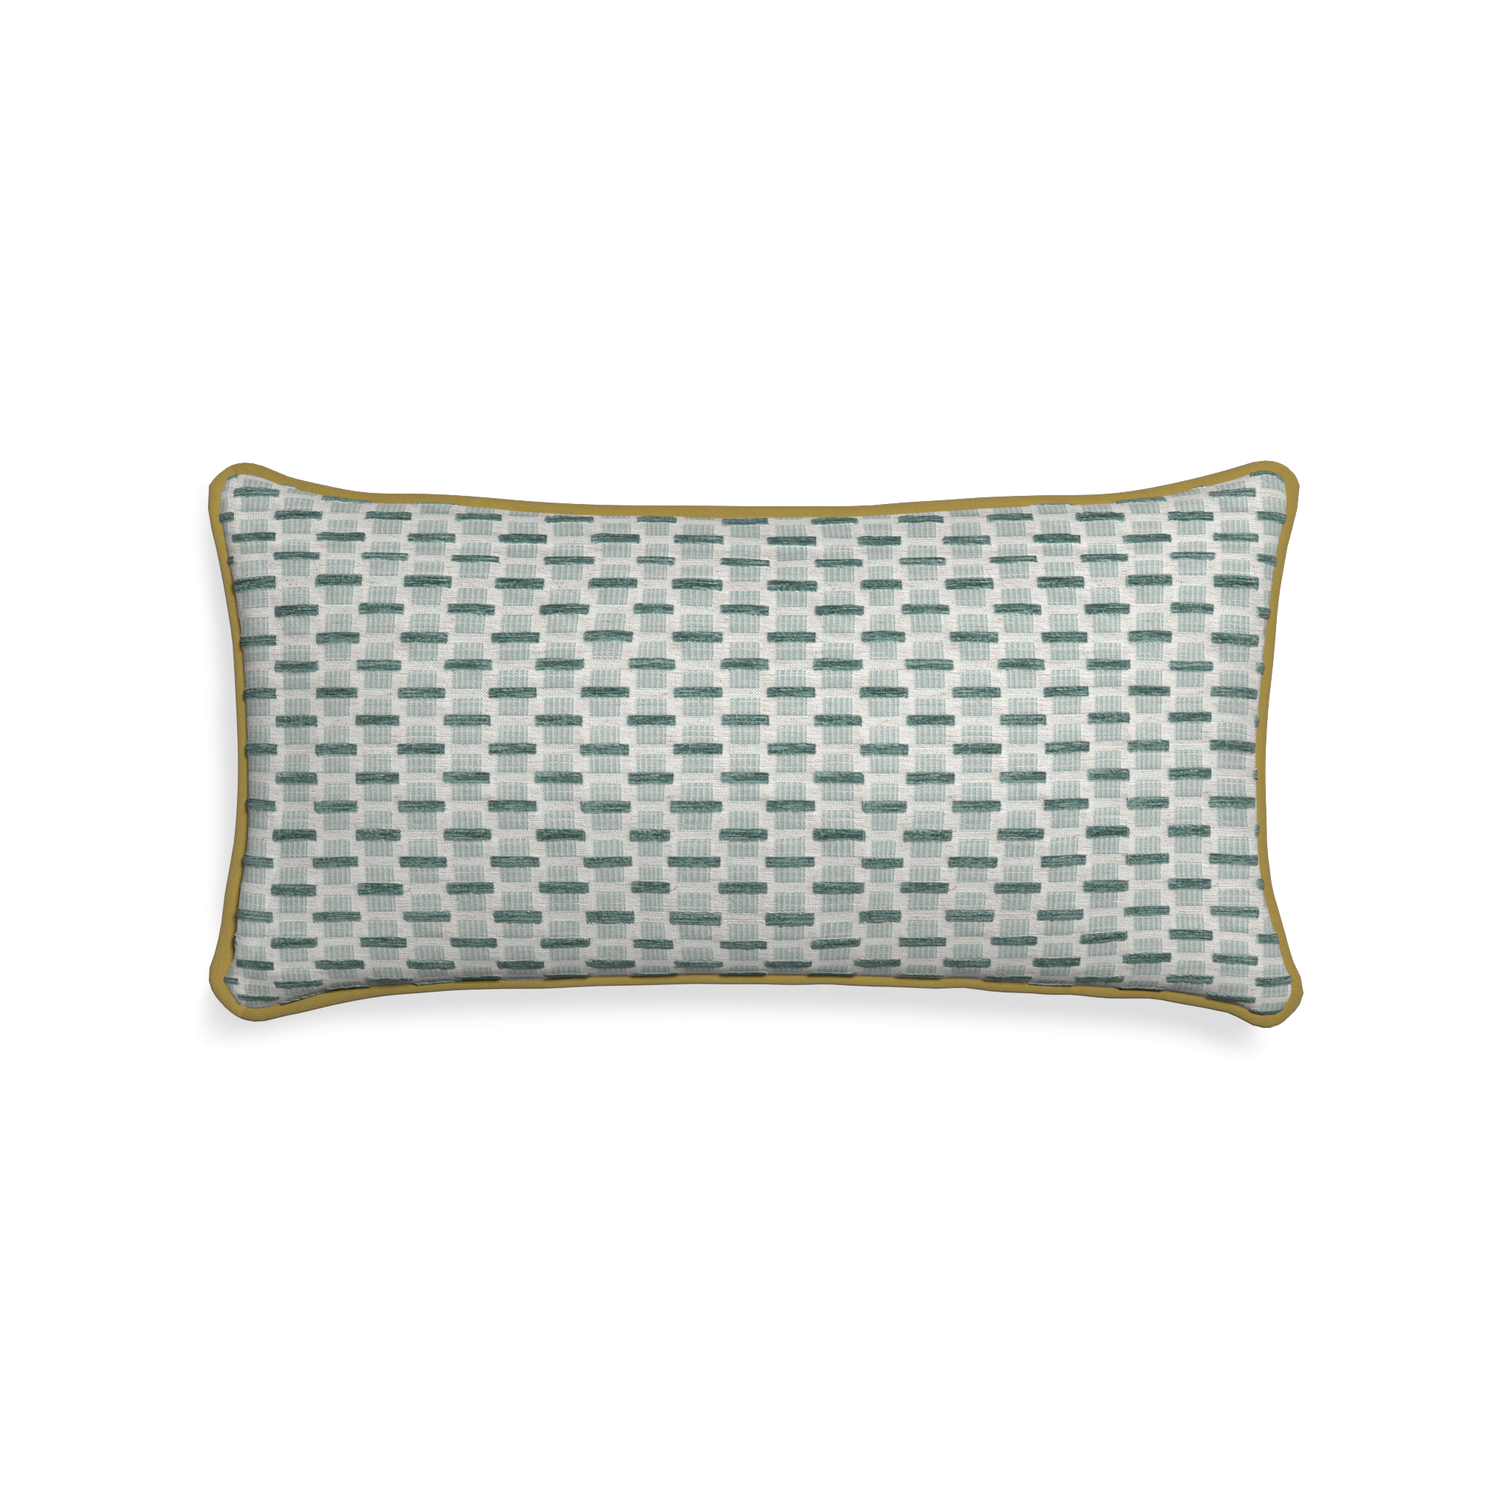 Midi-lumbar willow mint custom green geometric chenillepillow with c piping on white background